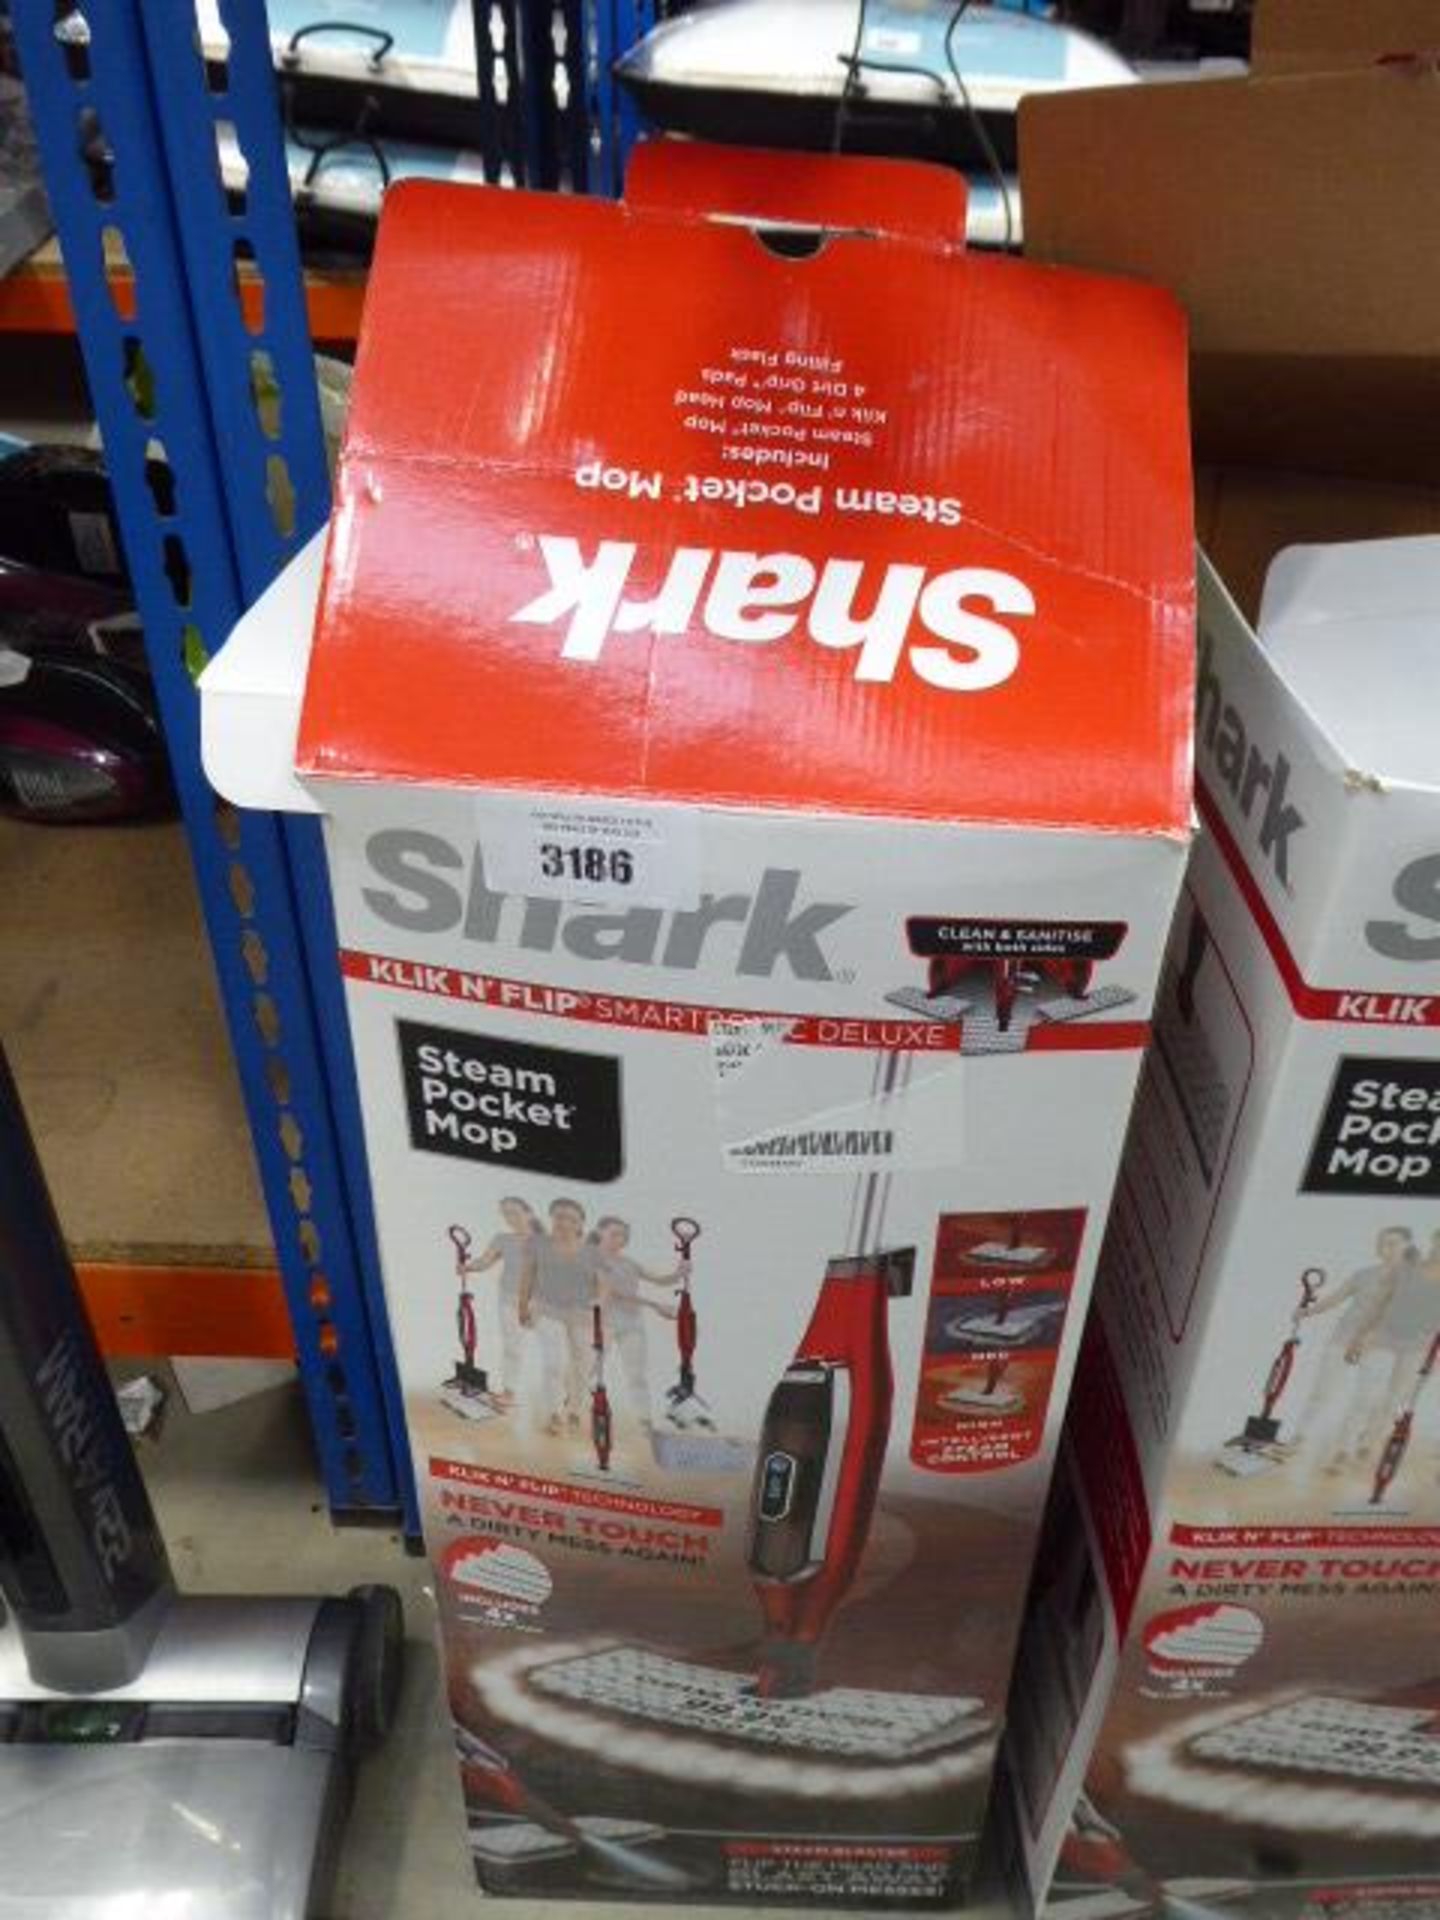 Upright Shark steam mop with box